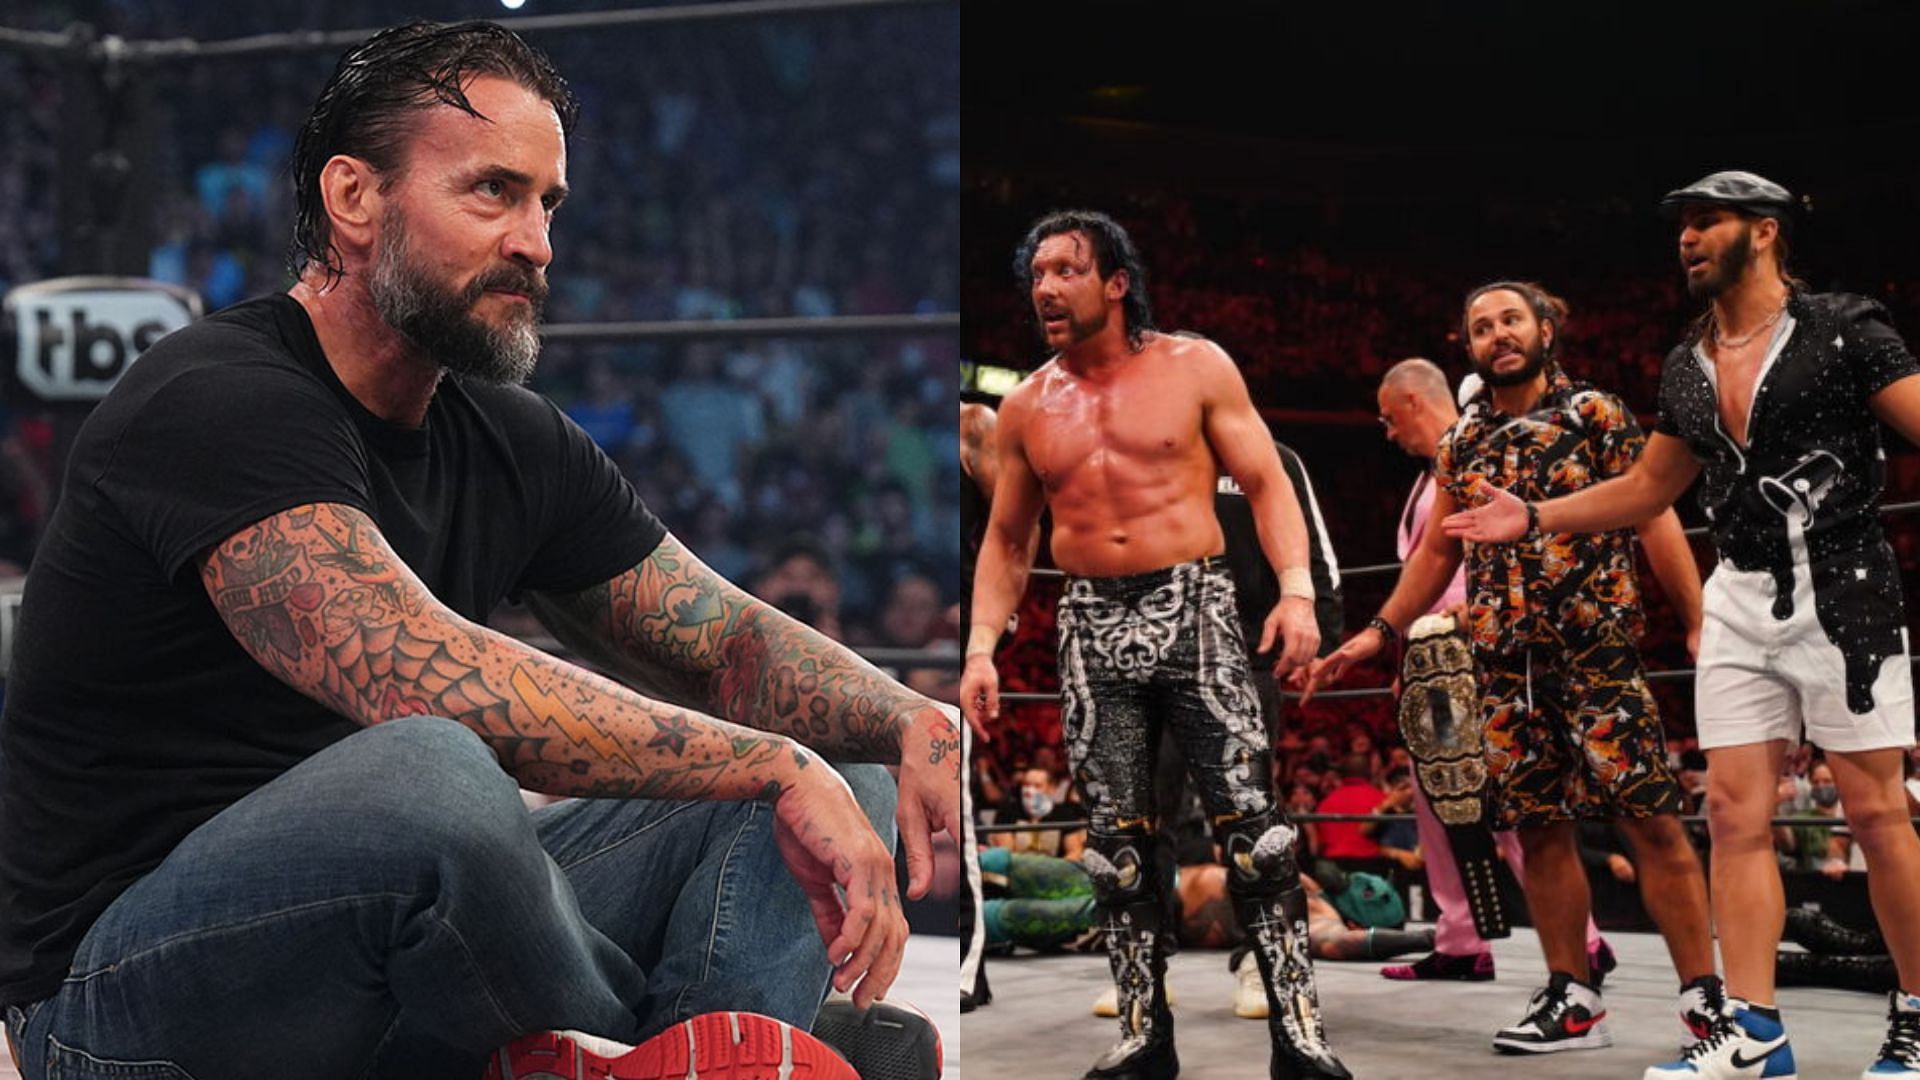 CM Punk and The Elite engaged in a backstage brawl after All Out